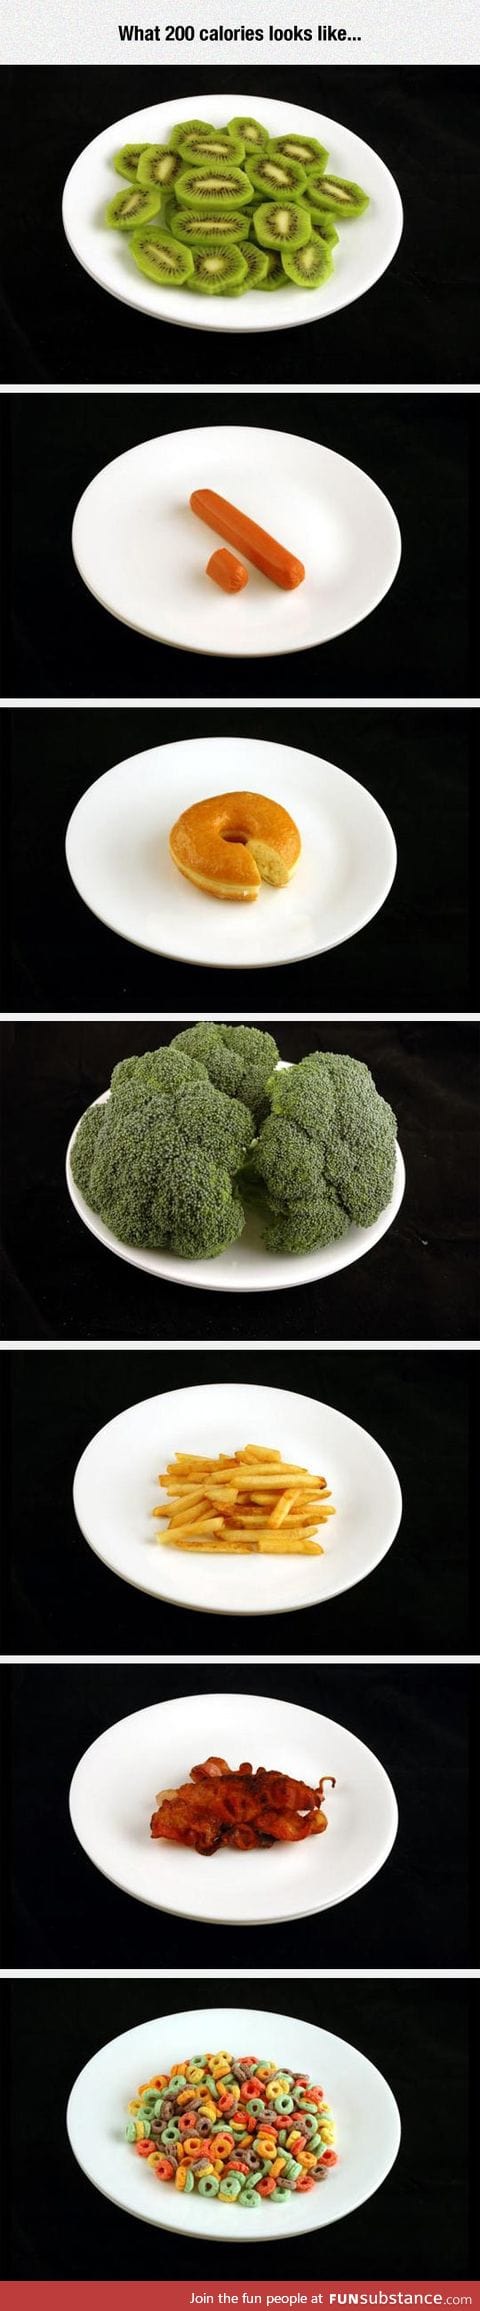 What 200 calories look like for different foods